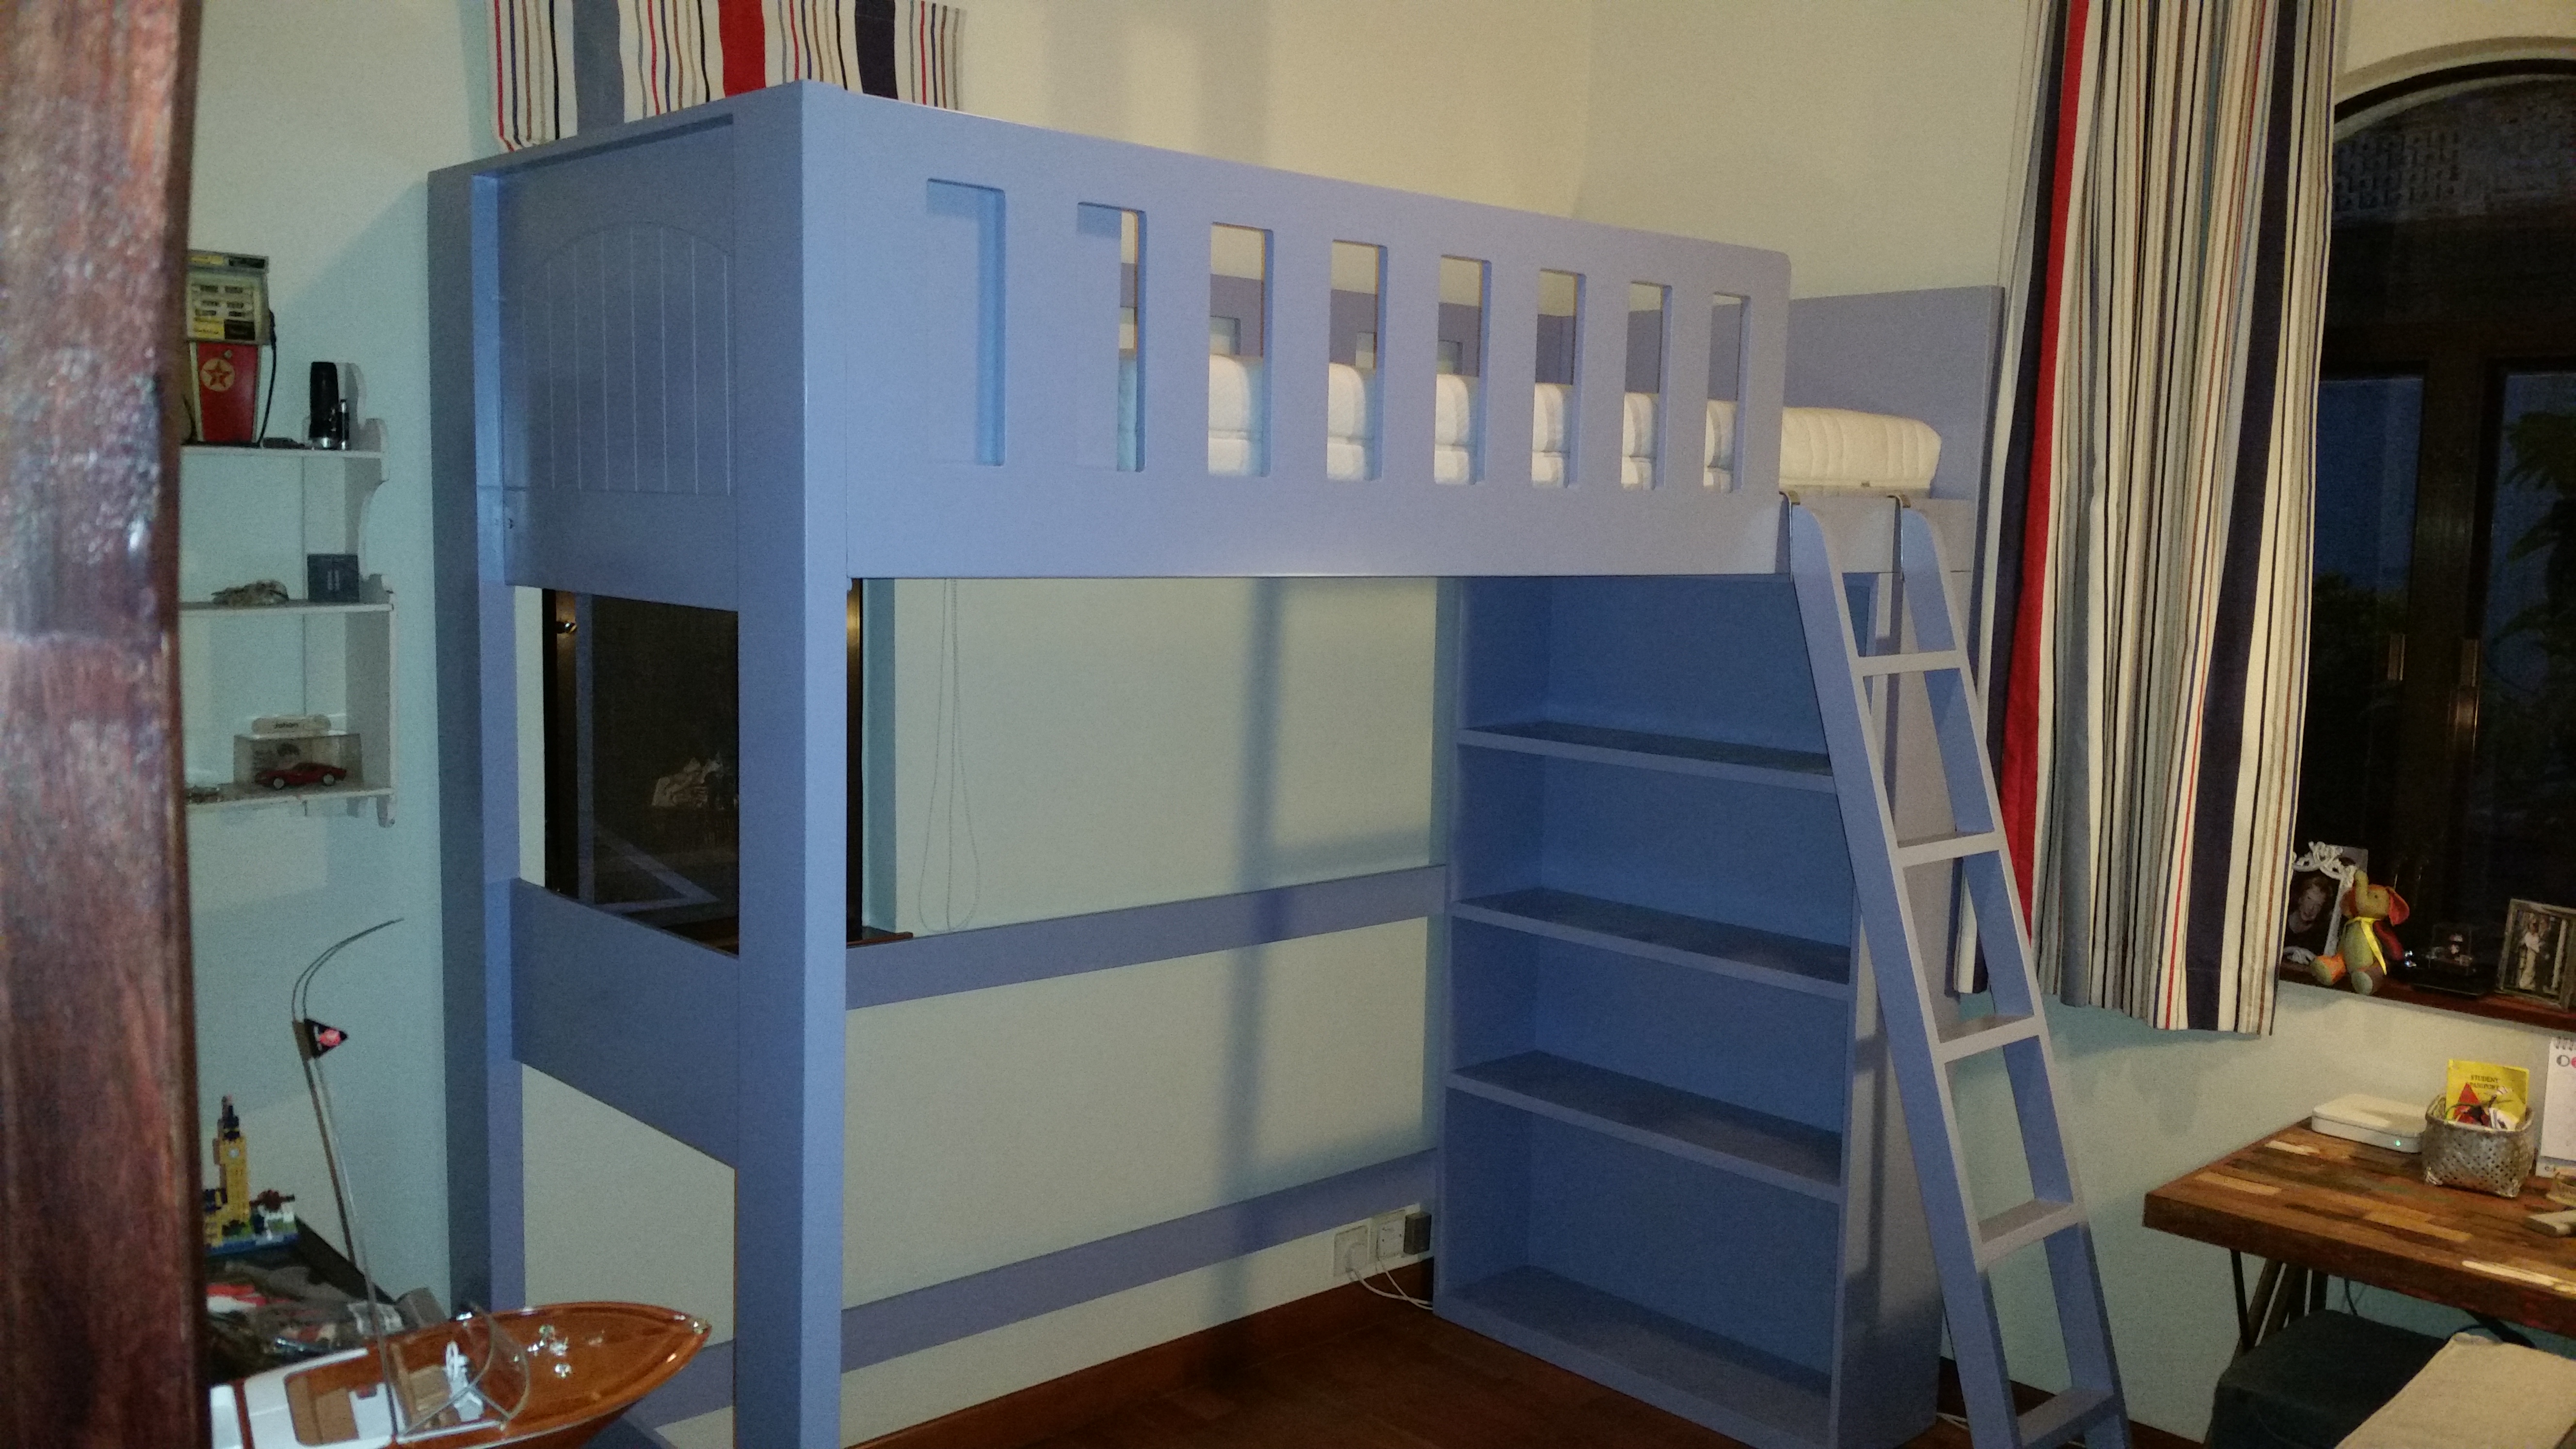 Custom-built boy's storage bed and bunk